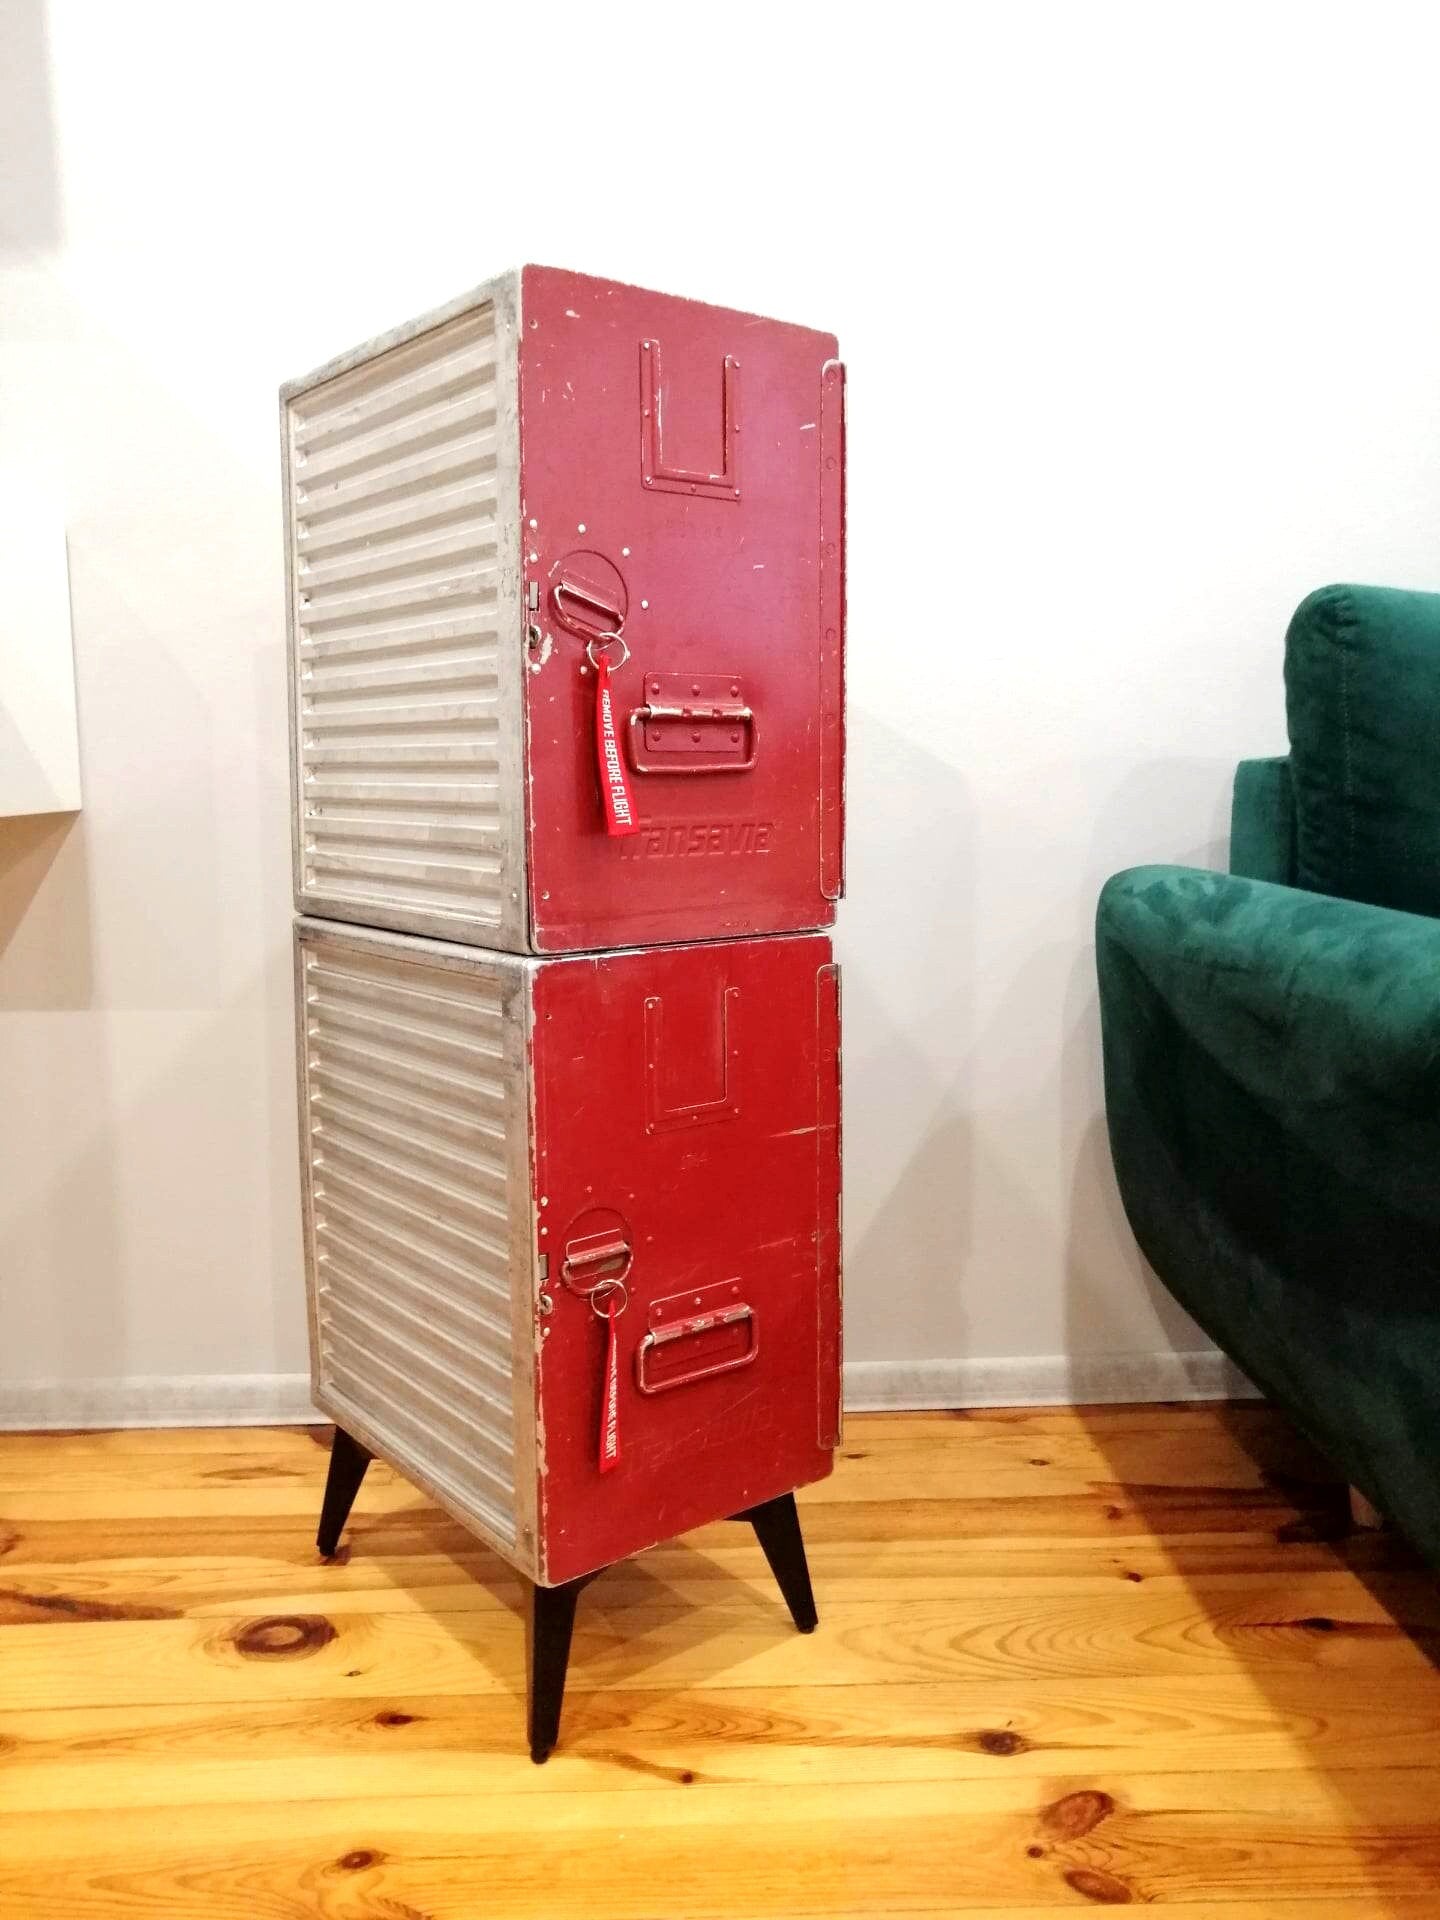 Aviation Storage Double Cabinet, Industrial Aircraft Cabinet Made of Original Transavia Airline Galley Storage Containers